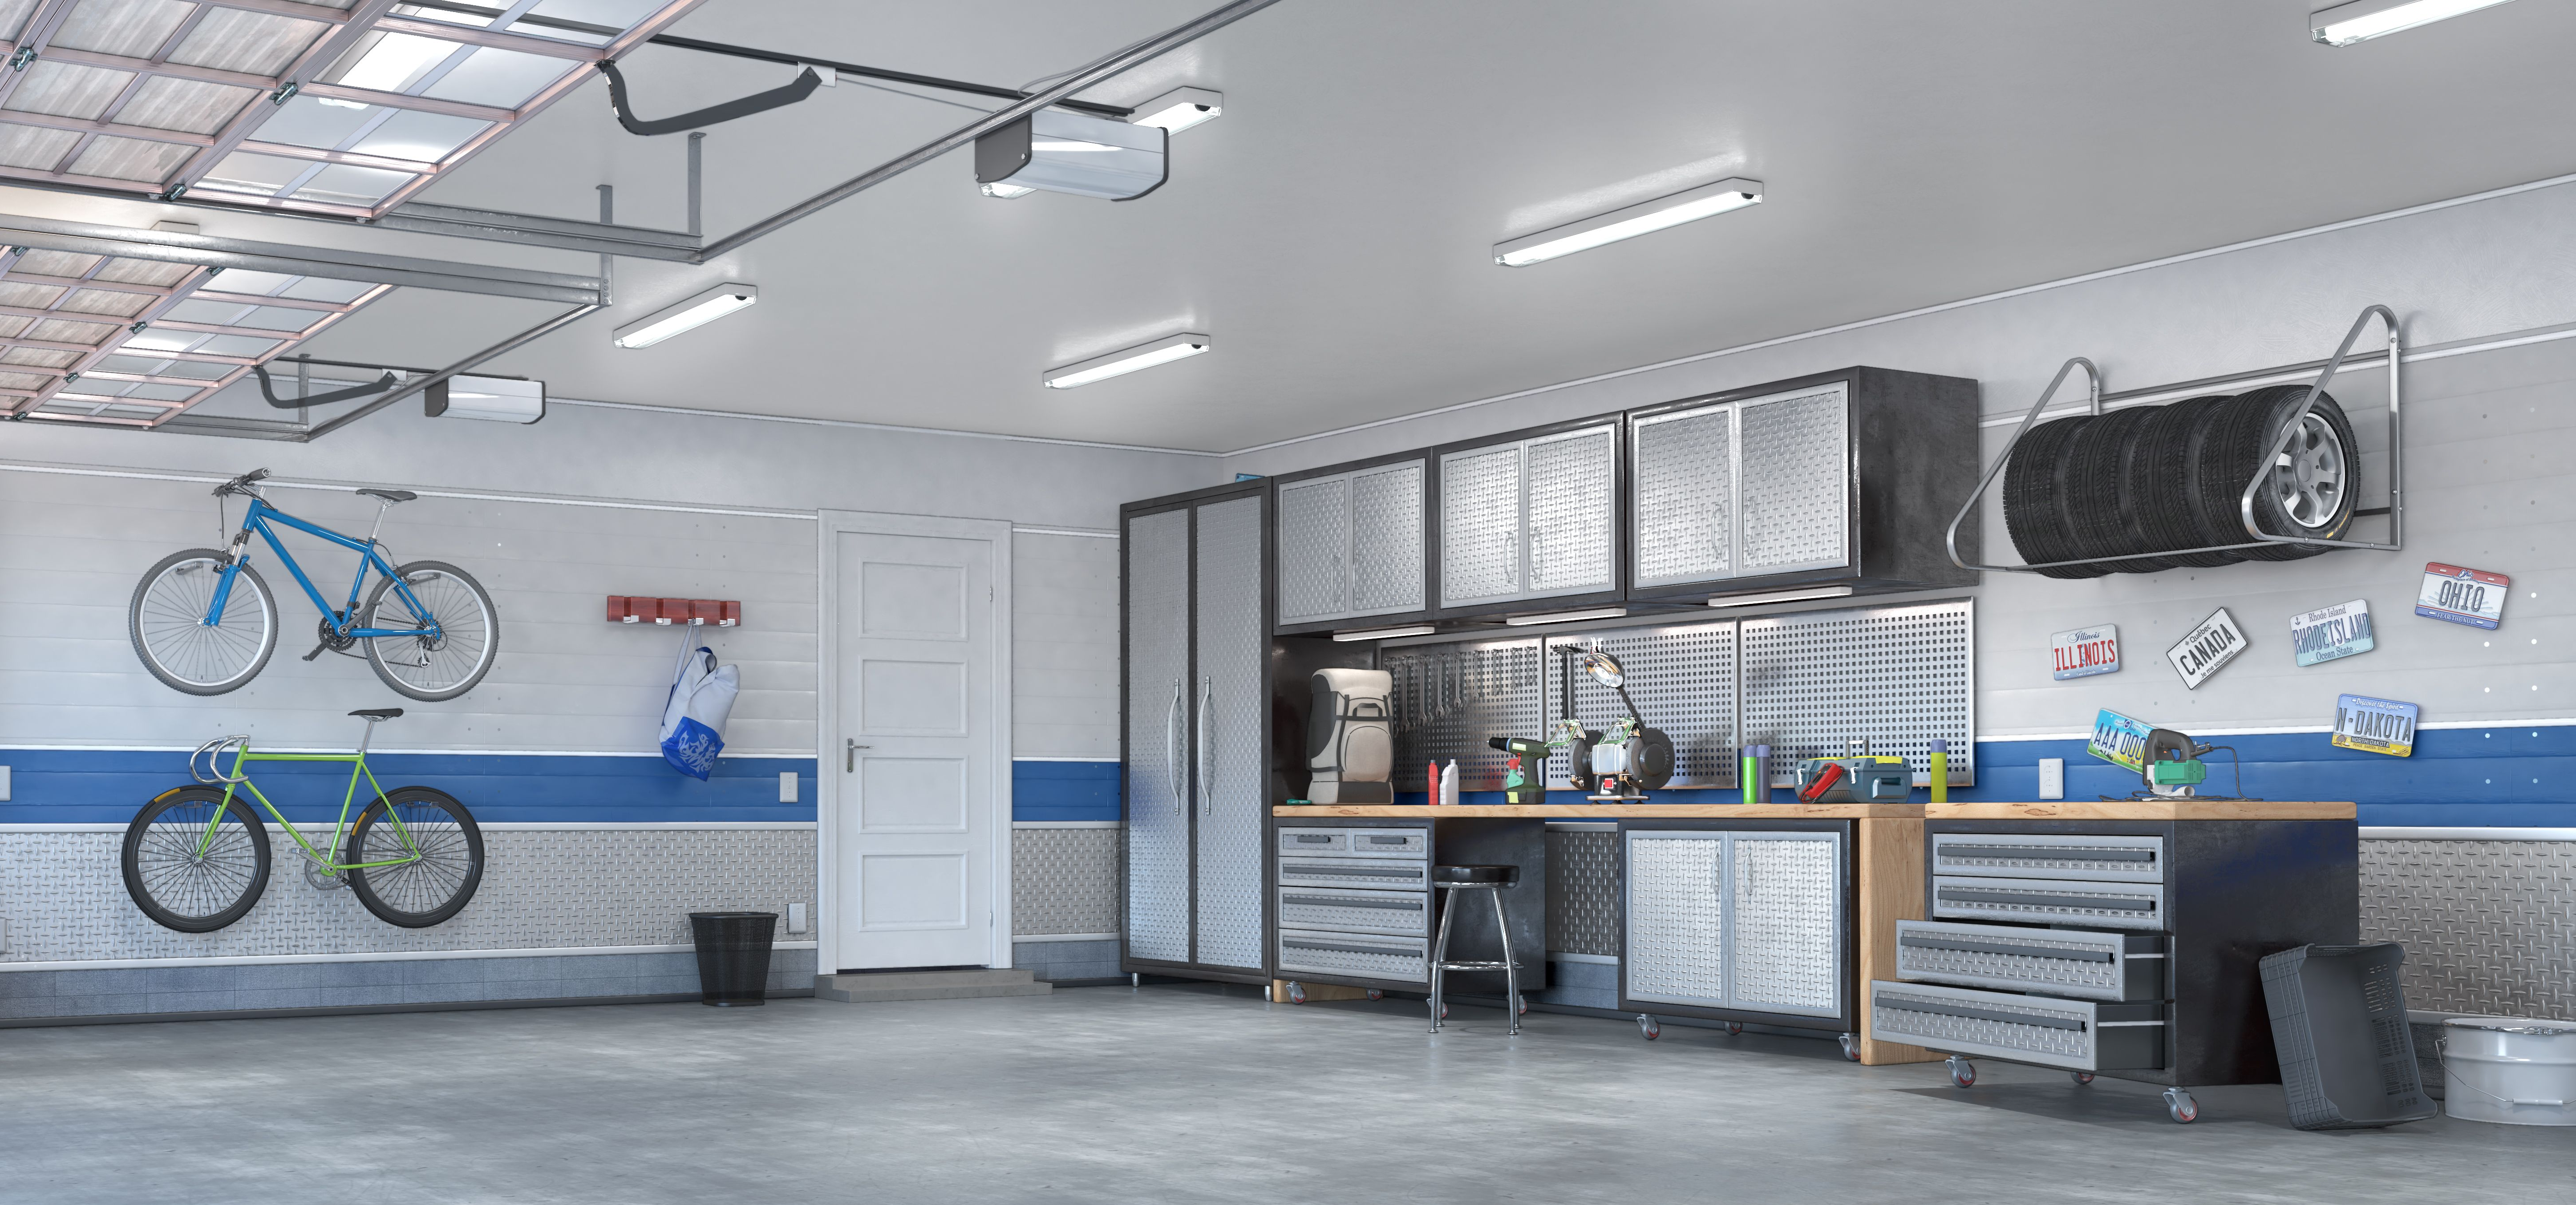 A Step-by-Step Guide to Creating a Functional Garage Space